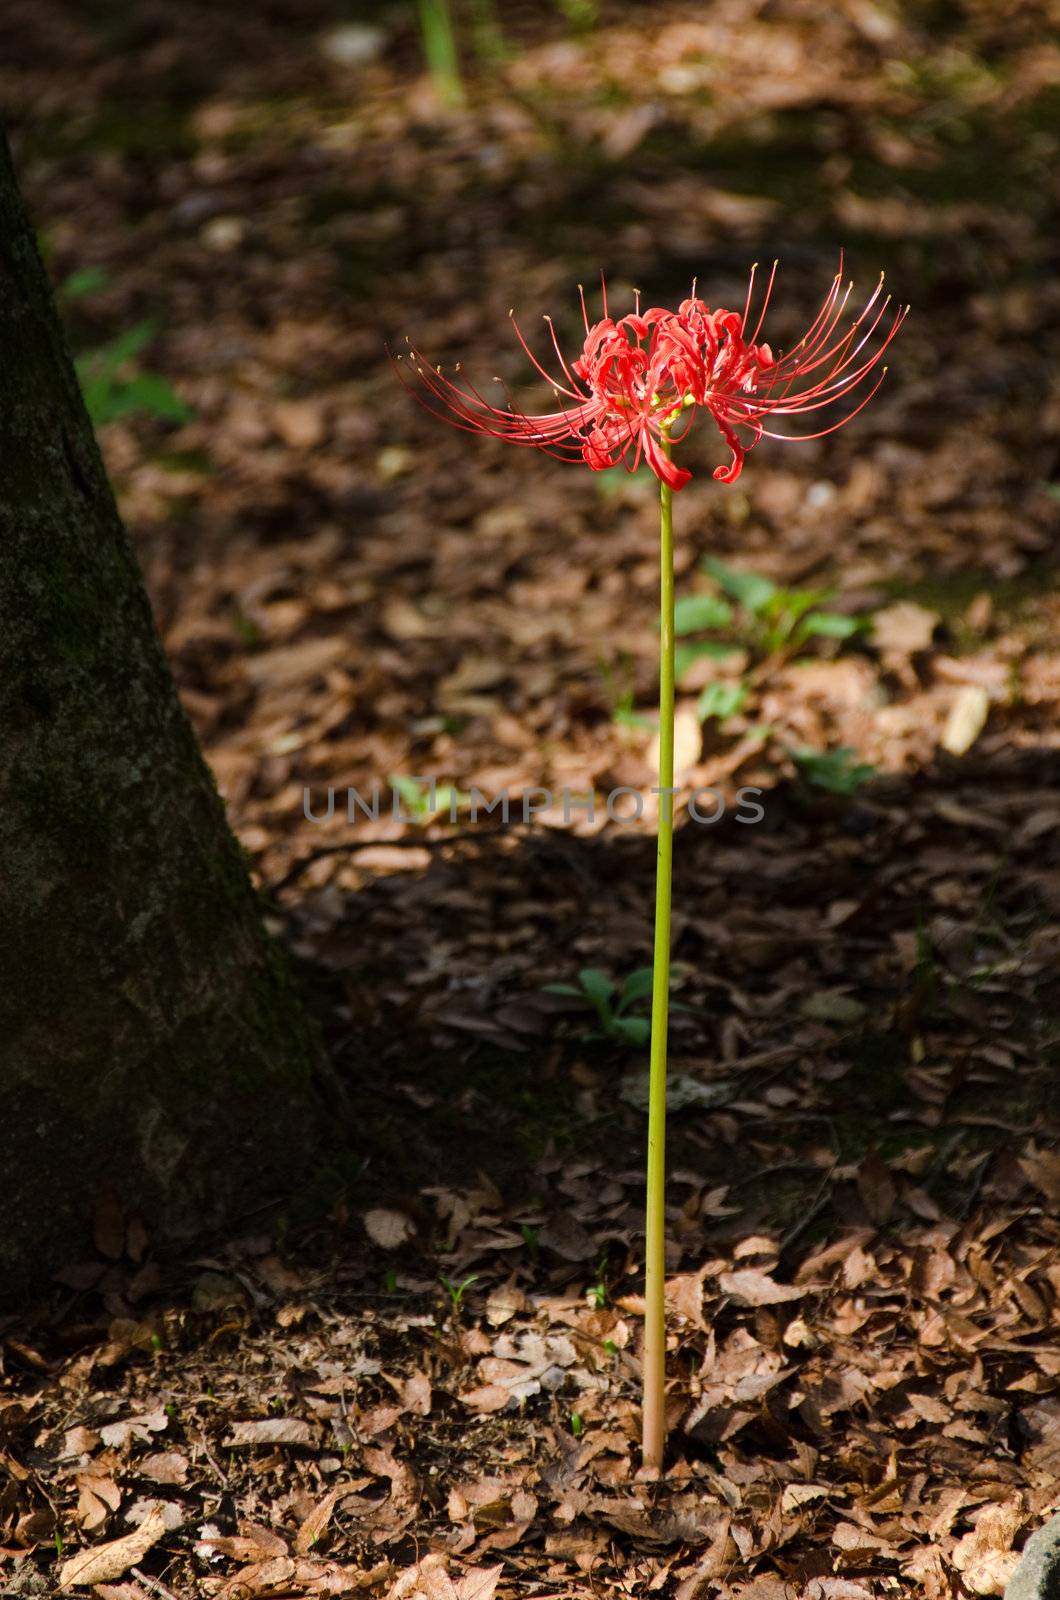 Red spider lily, Lycoris radiata, in its natural habitat on a forest floor